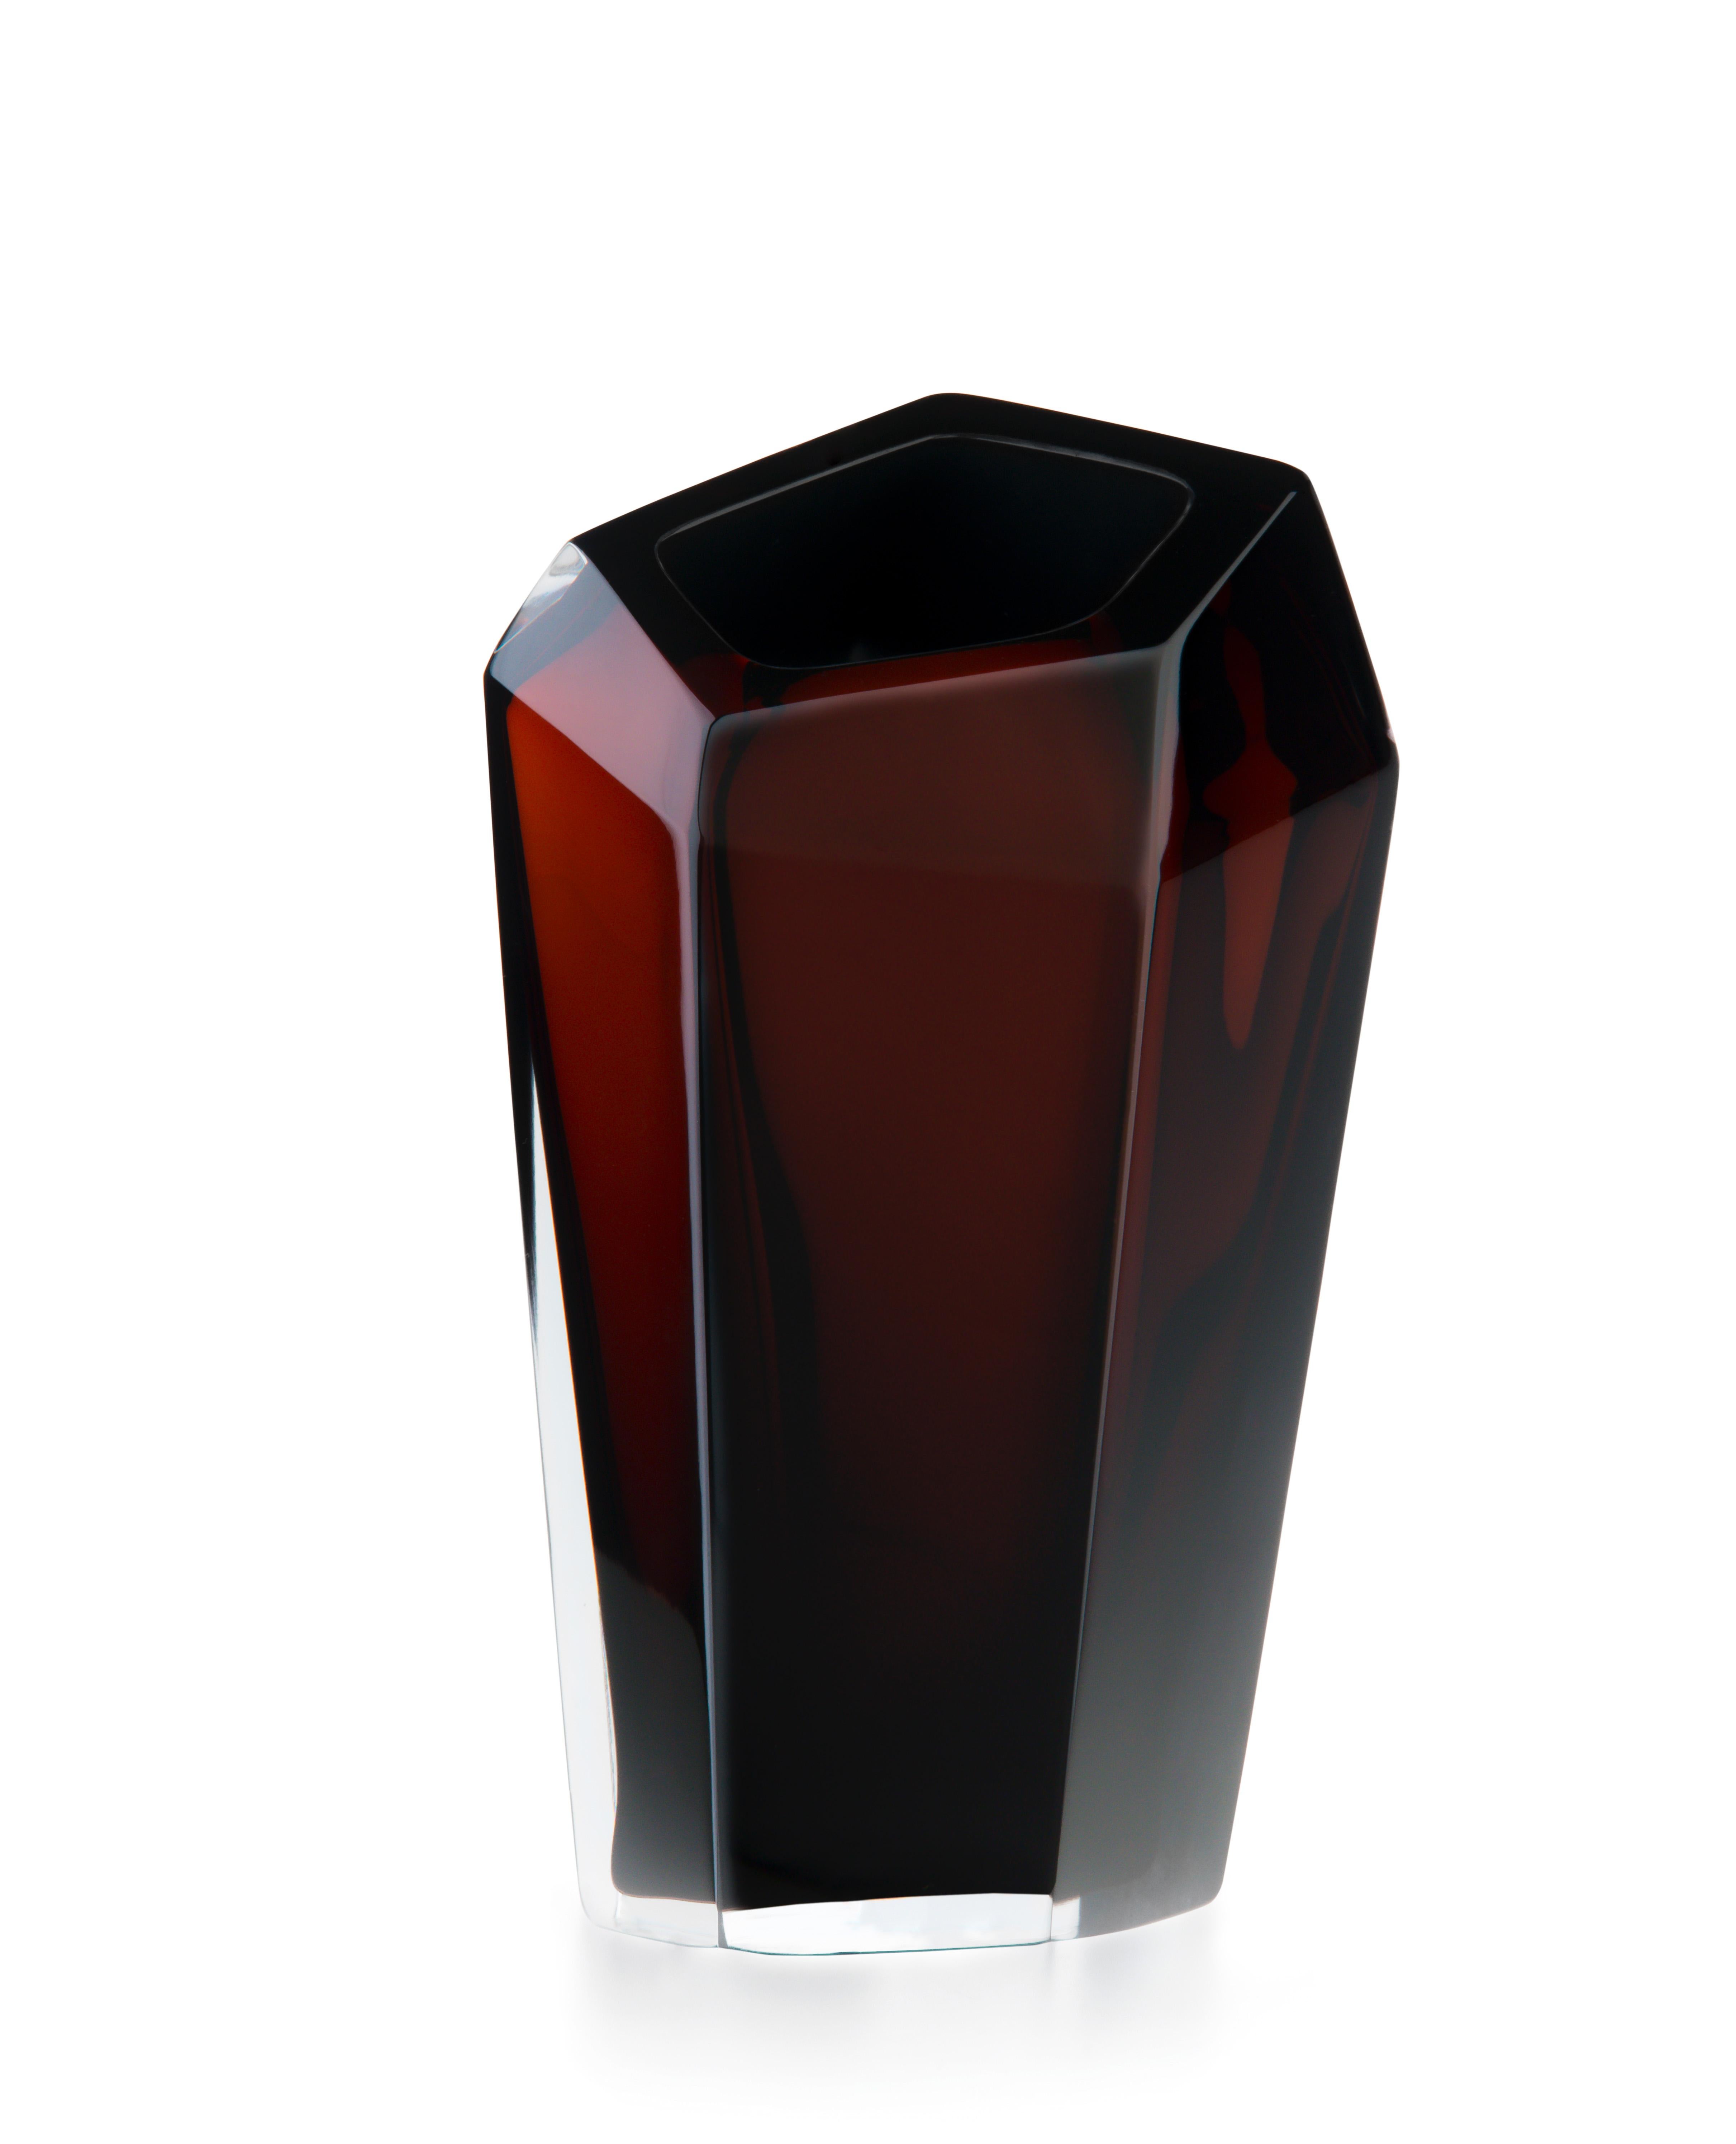 Kastle brown large vase by Purho
Dimensions: D20 x H47cm
Materials: Glass
Other colours and Dimensions are available.

Purho is a new protagonist of made in Italy design, a work of synthesis, a research that has lasted for years, an Italian